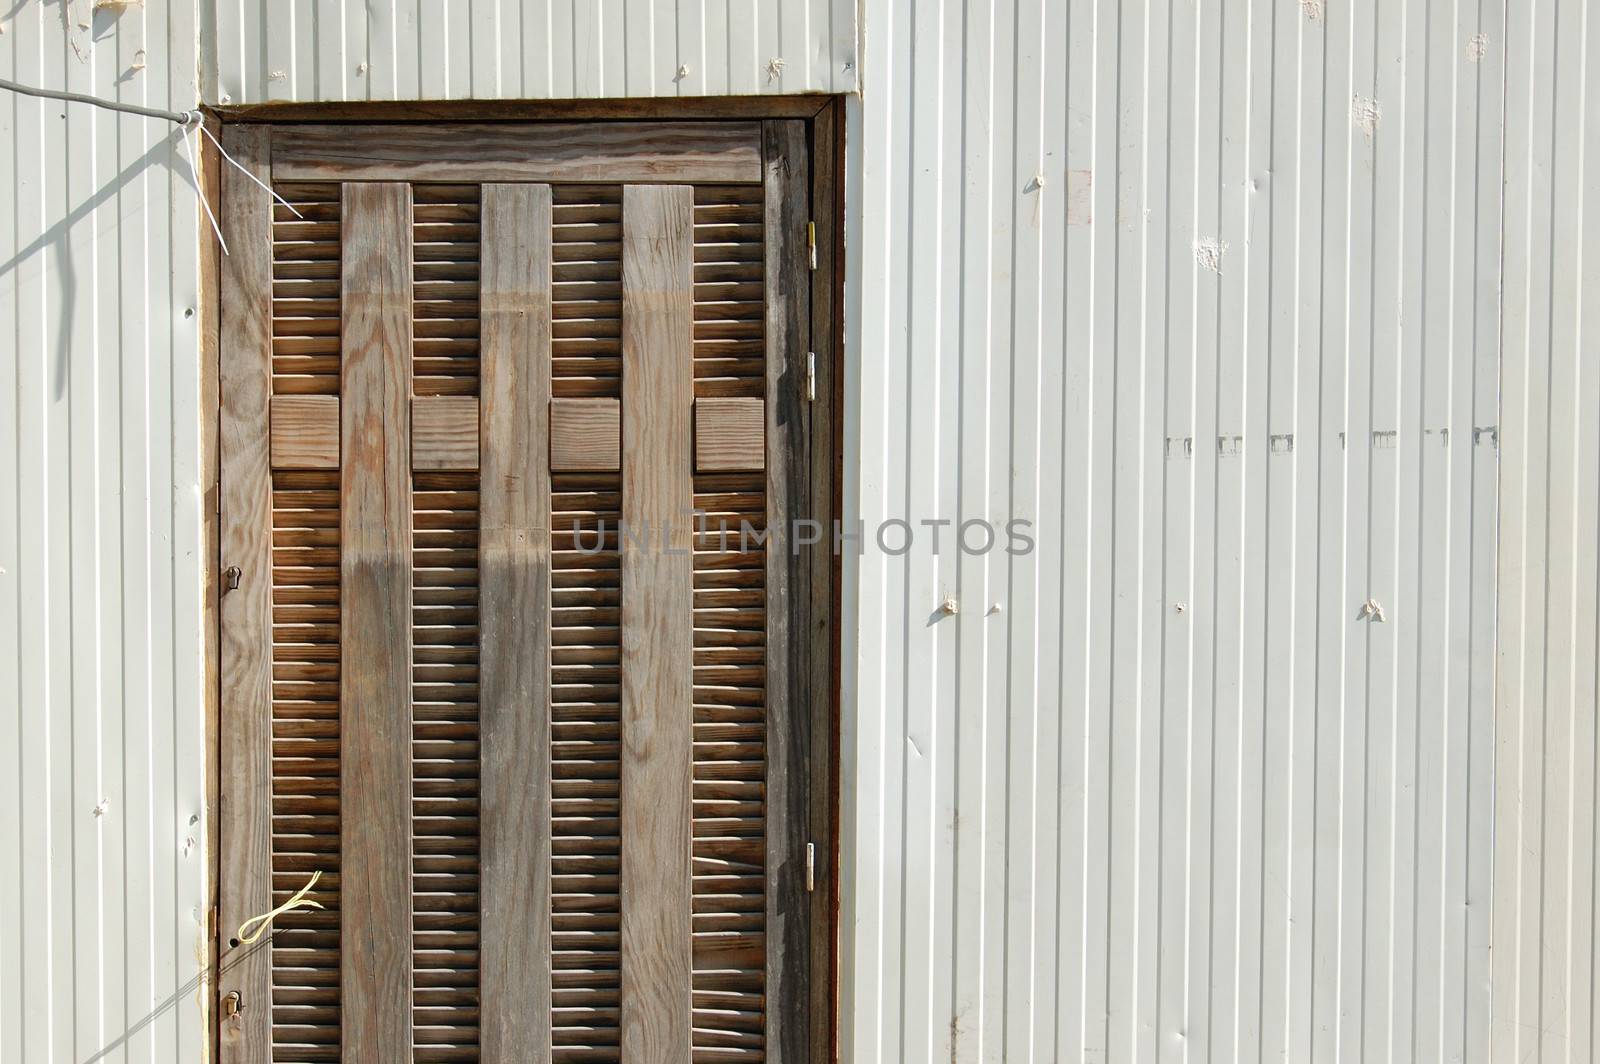 Plastic trailer wall and wooden door exterior abstract background.